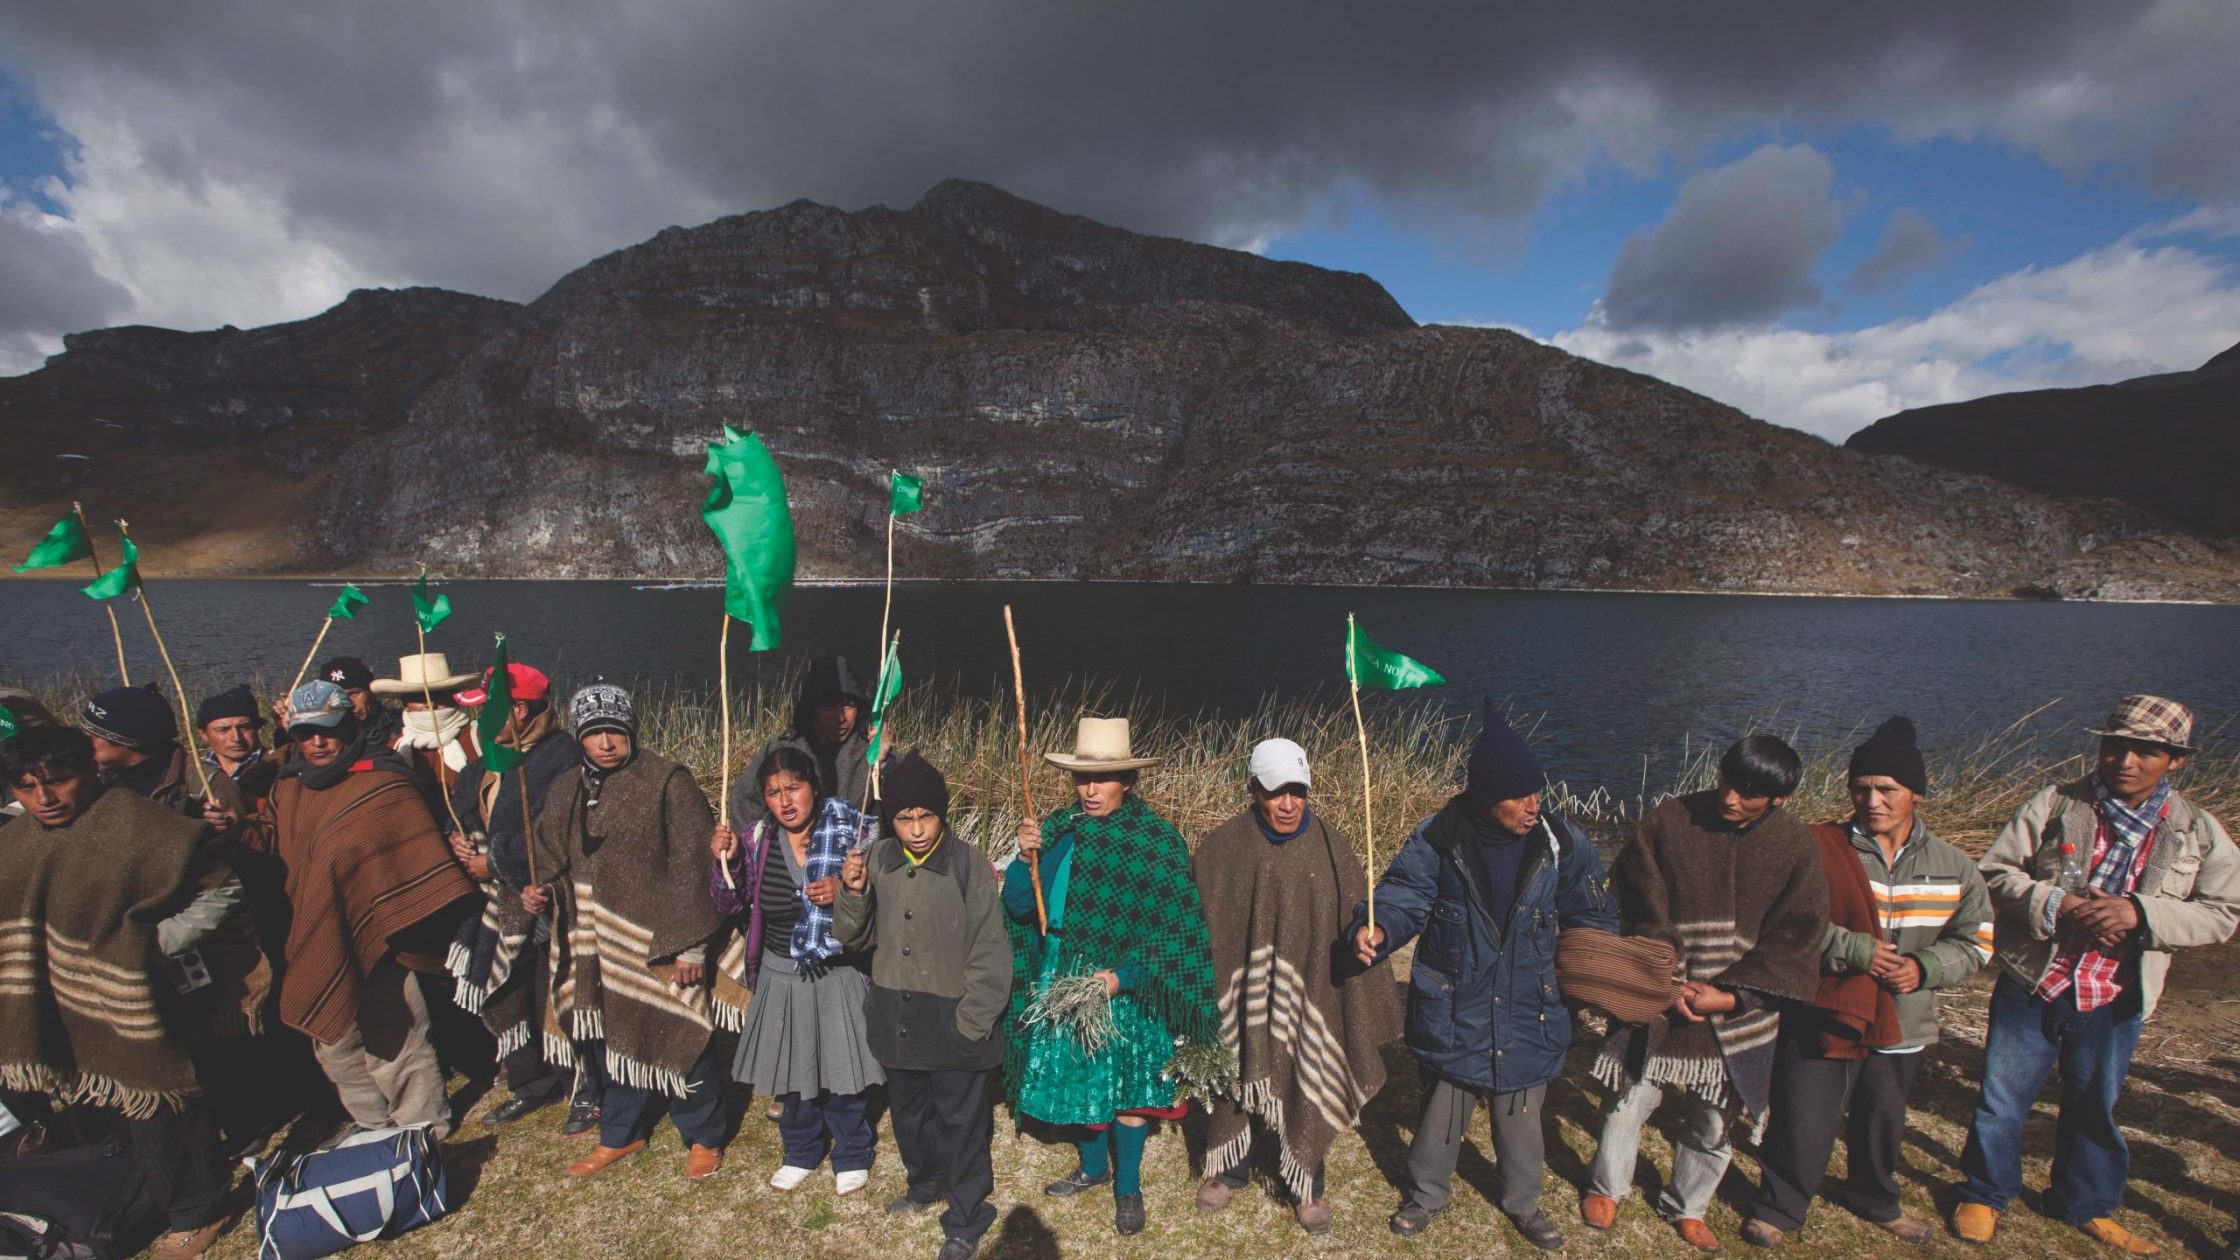 Peru villages protest in front of lake and mountain